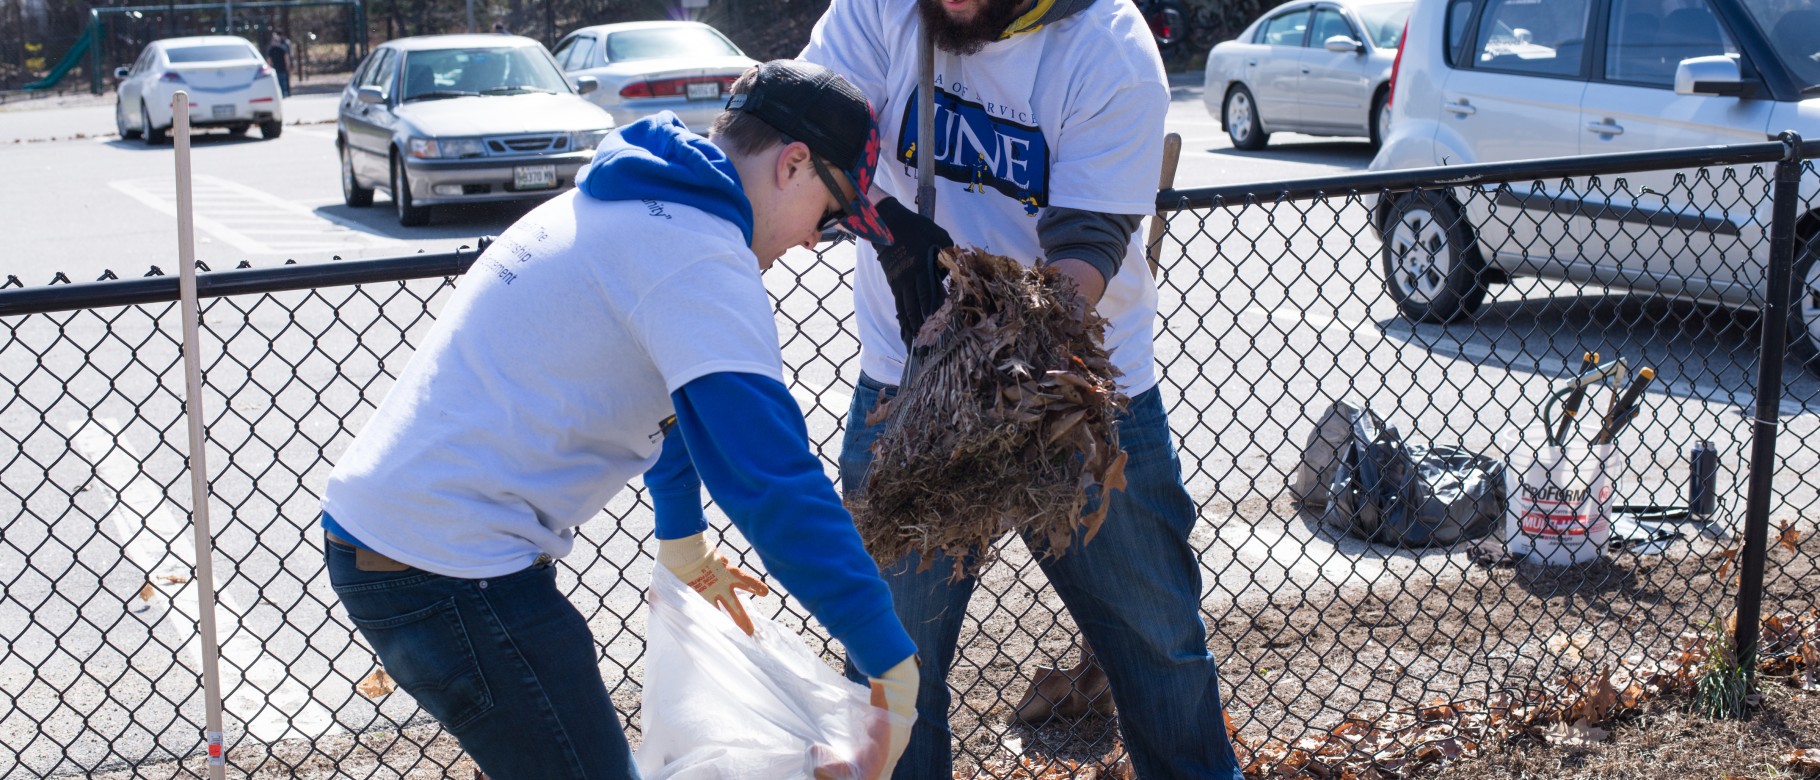 Students participating in last year's inaugural Day of Service